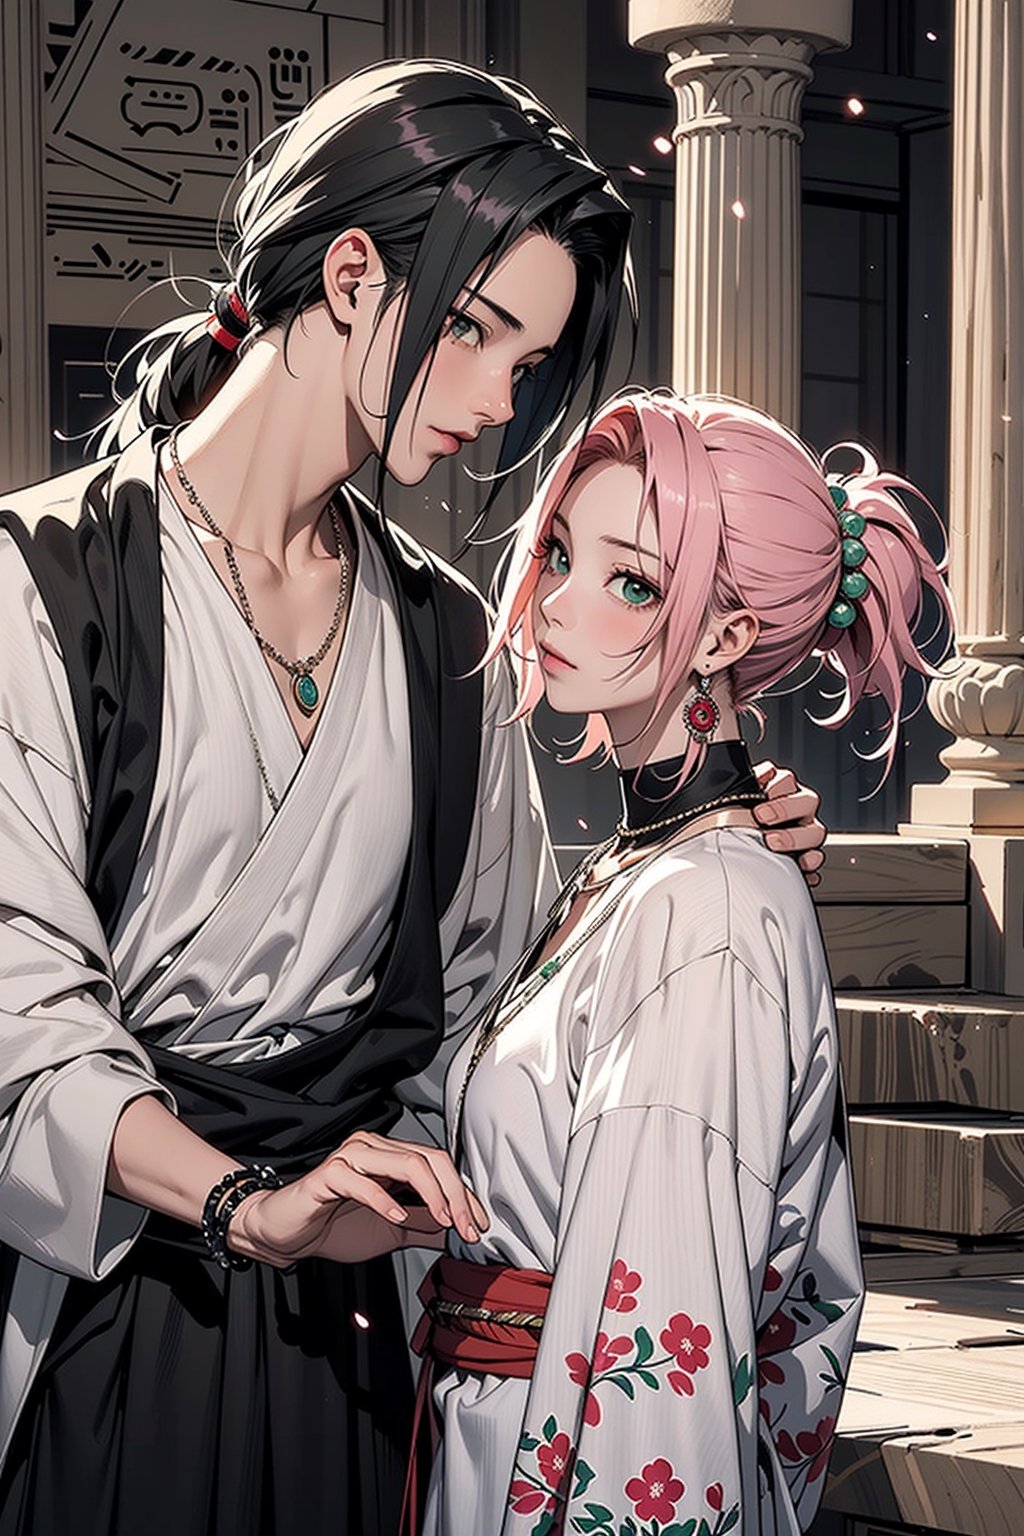 1girl with short pink hair and green eyes wearing egpyt-style dress named Sakura Haruno, 1man with long black hair in a low ponytail and black eyes named Itachi Uchiha, both having hair ornaments and jewelry, necklace, wearing egypt clothes, looking at each other, royalty, harunoshipp, ancient_egypt, ancient_egyptian, egypt, egyptian, egyptian_mythology,Itachi Uchiha 